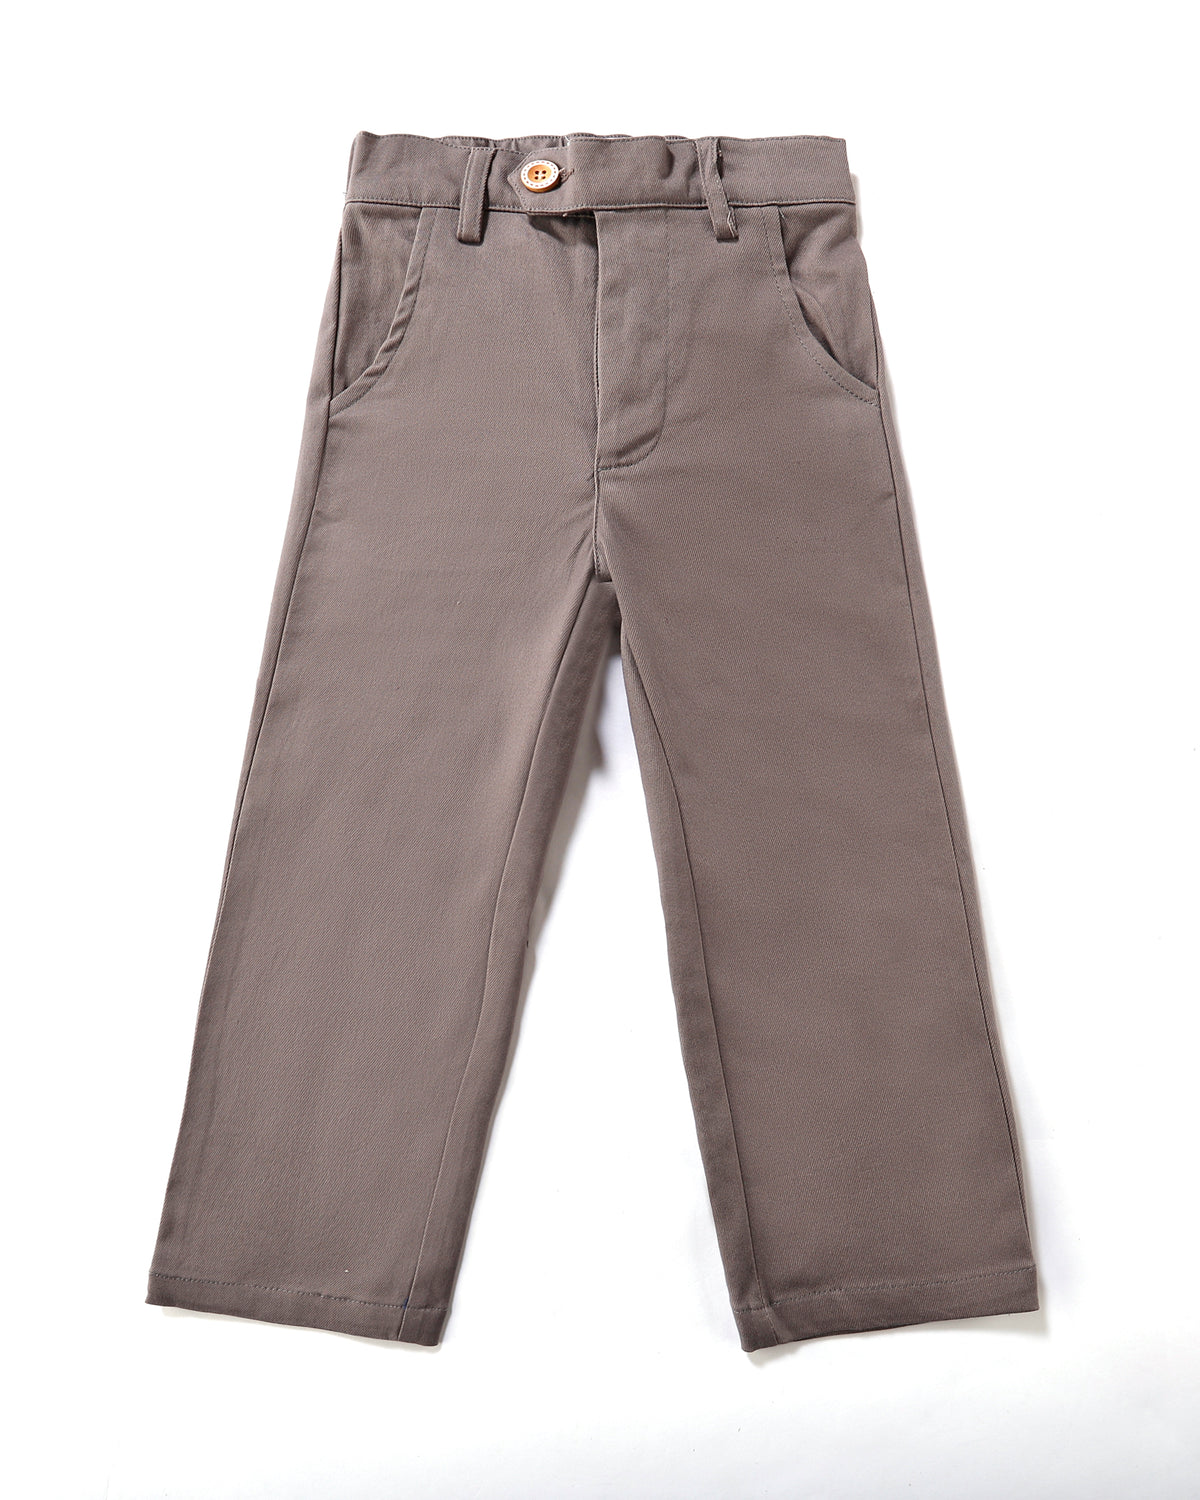 Signature Chino in Steel Front